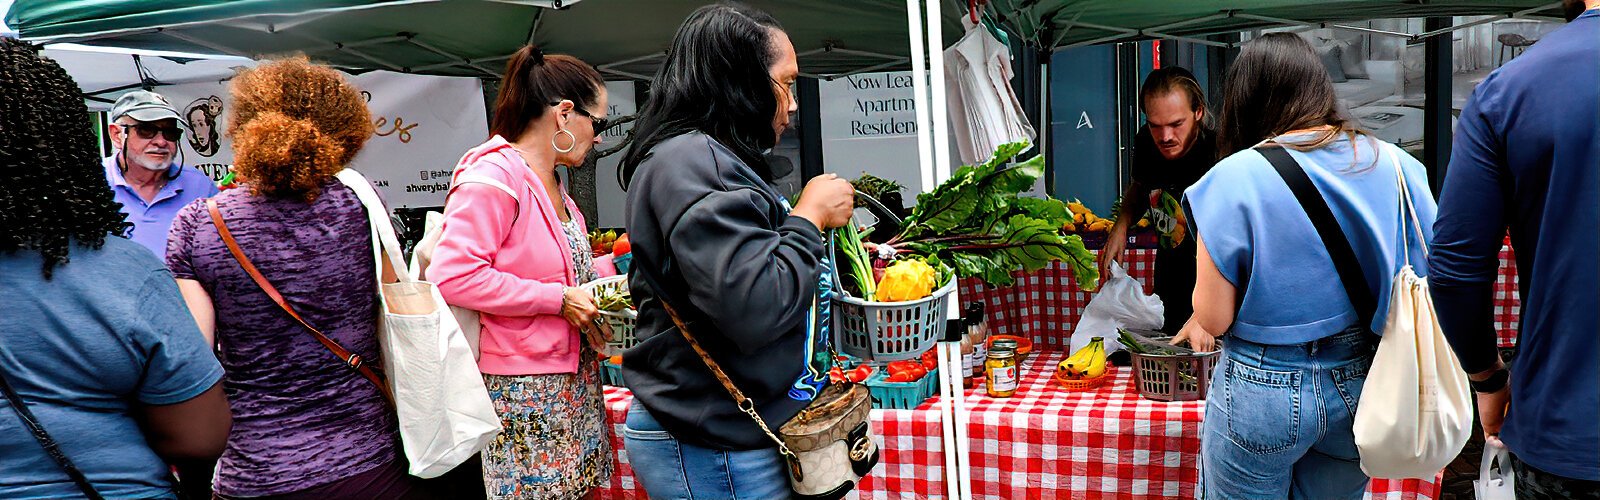 Taking place in the heart of Water Street Tampa, The Market gives residents and visitors a mix of wellness-focused vendors, artisans and farmers selling their fresh produce.